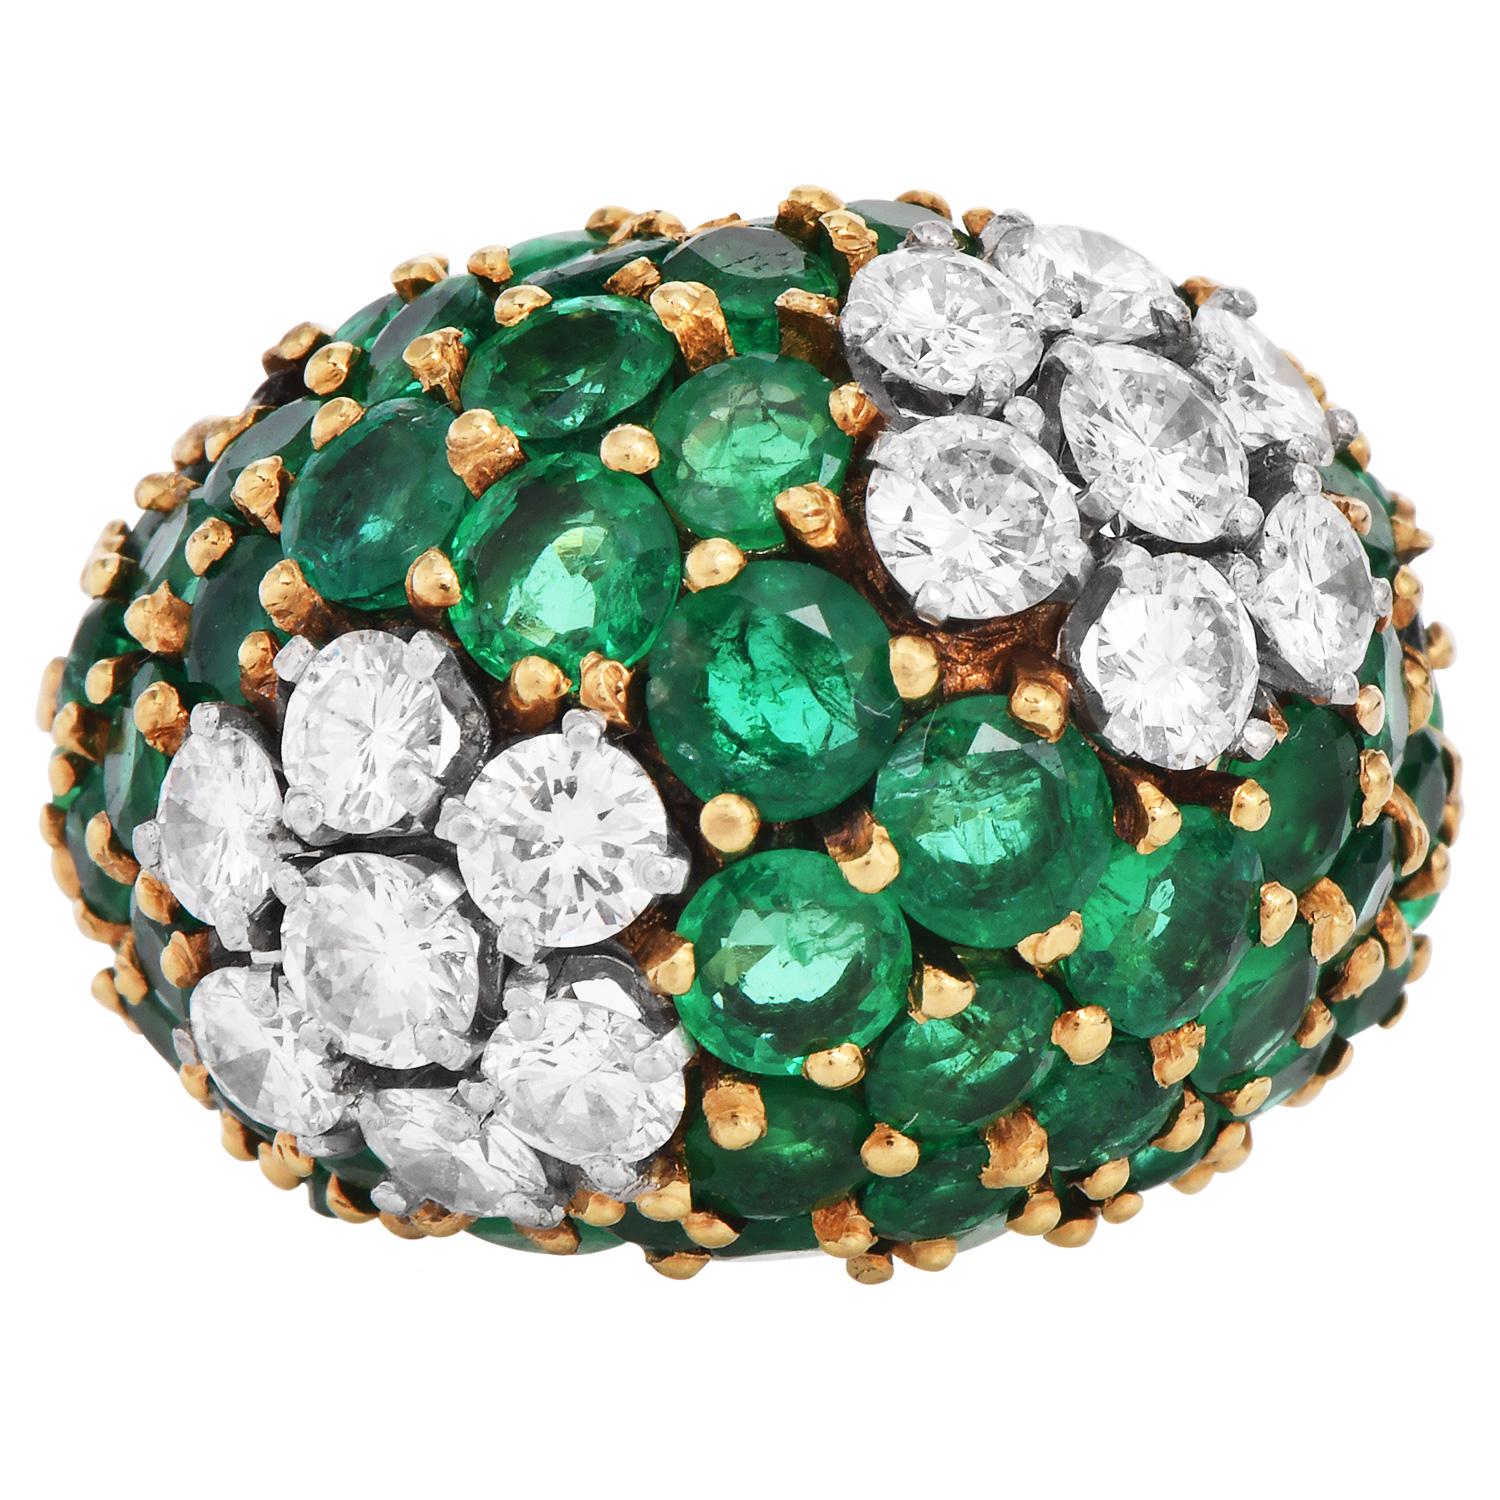 This stunning vintage Emerald and diamond cluster dome ring is crafted in 18K yellow gold. Pave set with high-quality round shape emeralds shaped tsavorites approx. 15.00 carats and round cut diamonds approx. 2.50 carats, graded H-I color, and VS